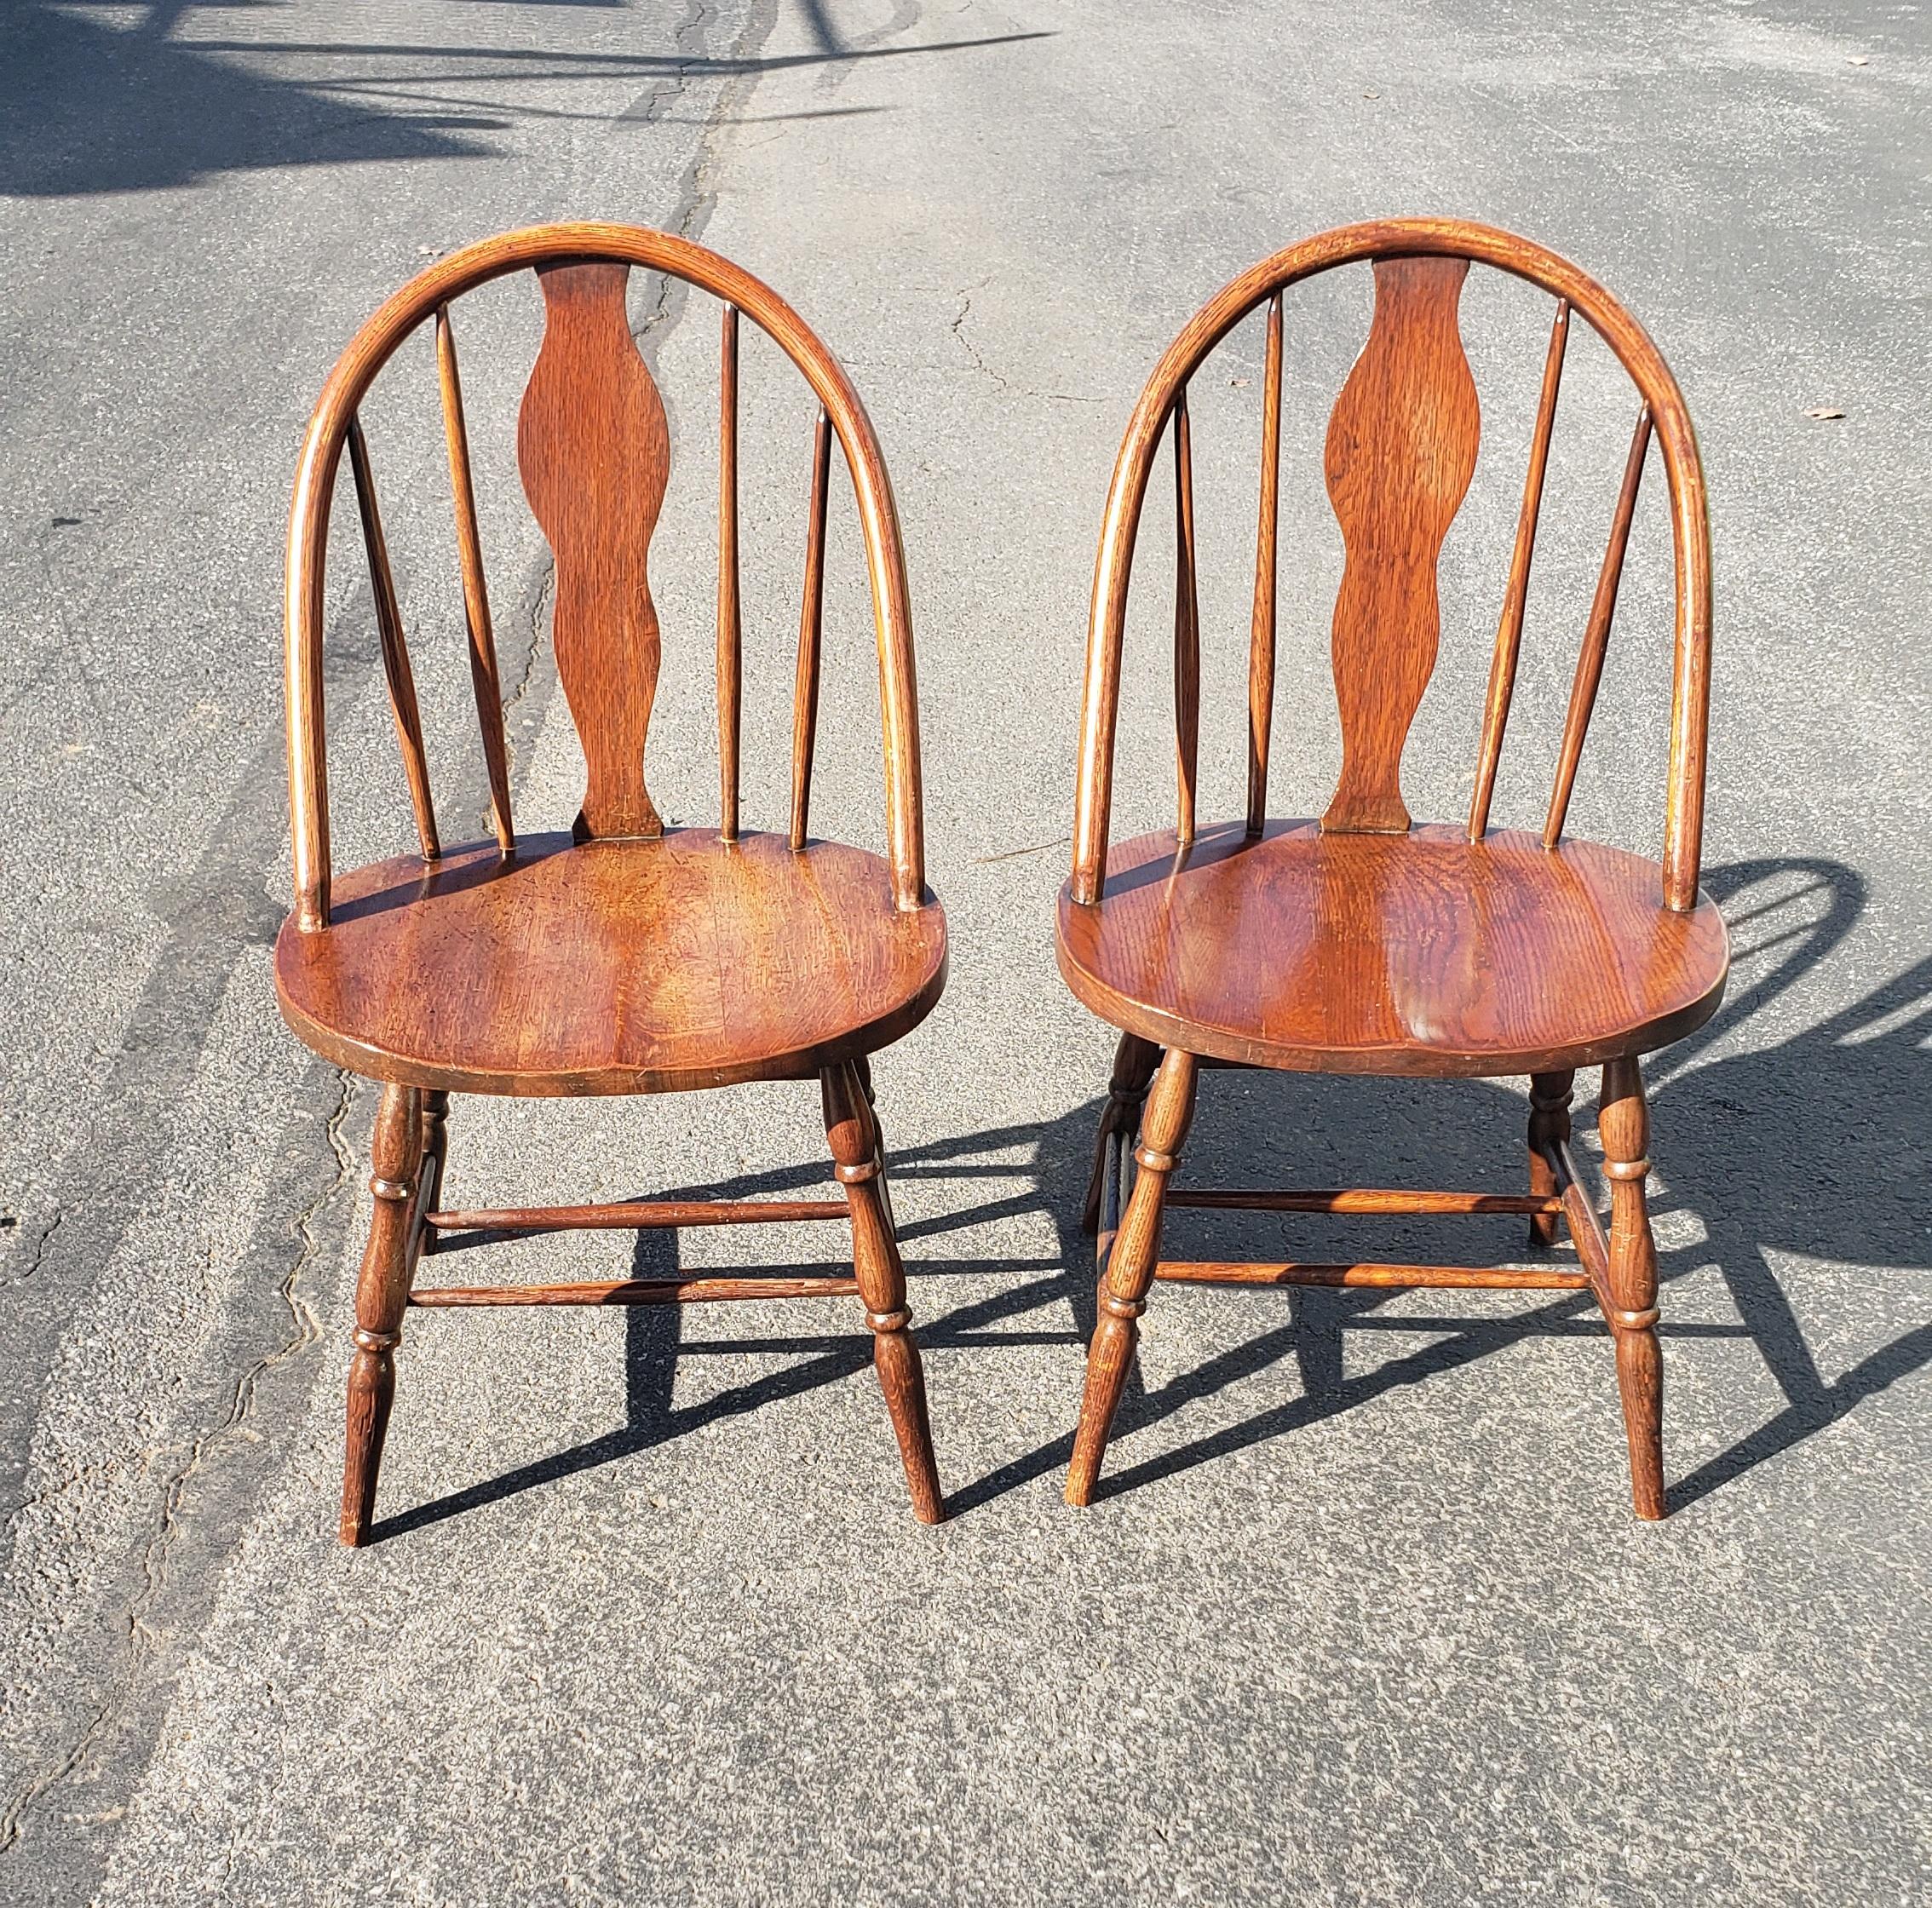 A pair of early American style wide red oak Windsor side chairs in good vintage condition. Structurally sound pair of chairs. Measure 19.5